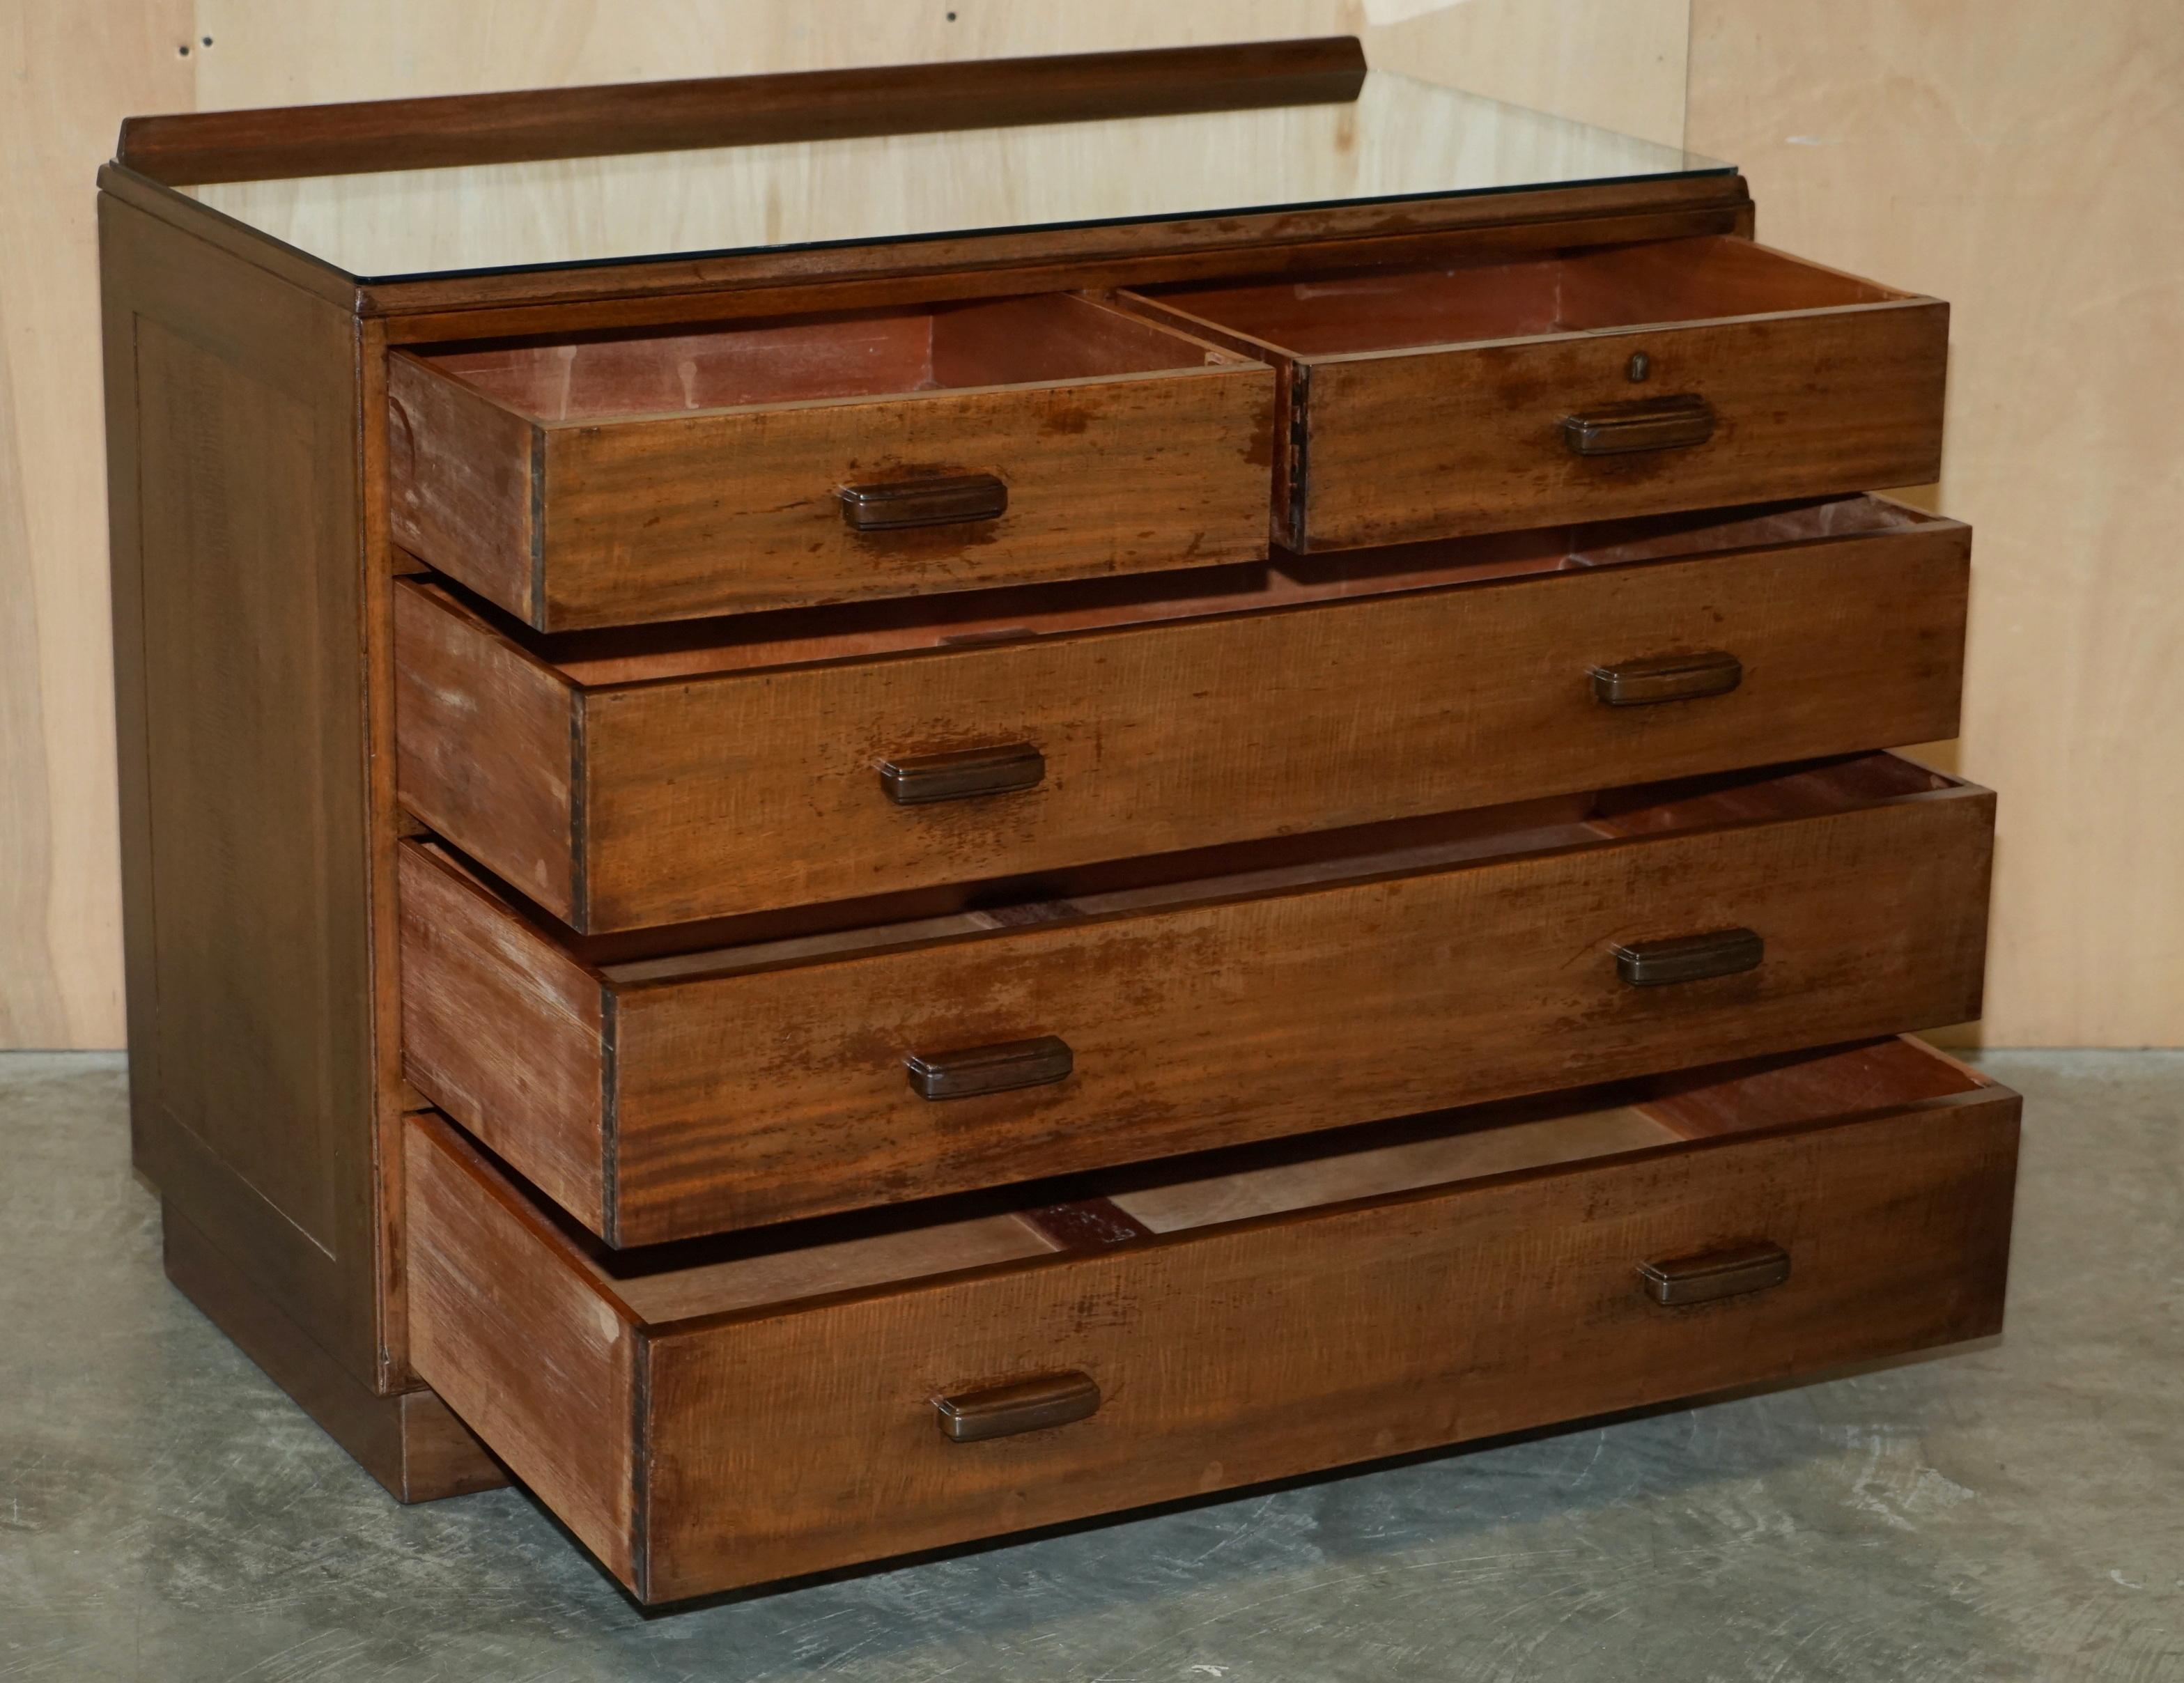 Alfred COX Mid-Century Modern Chests of Drawers Circa 1952 English Oak For Sale 5